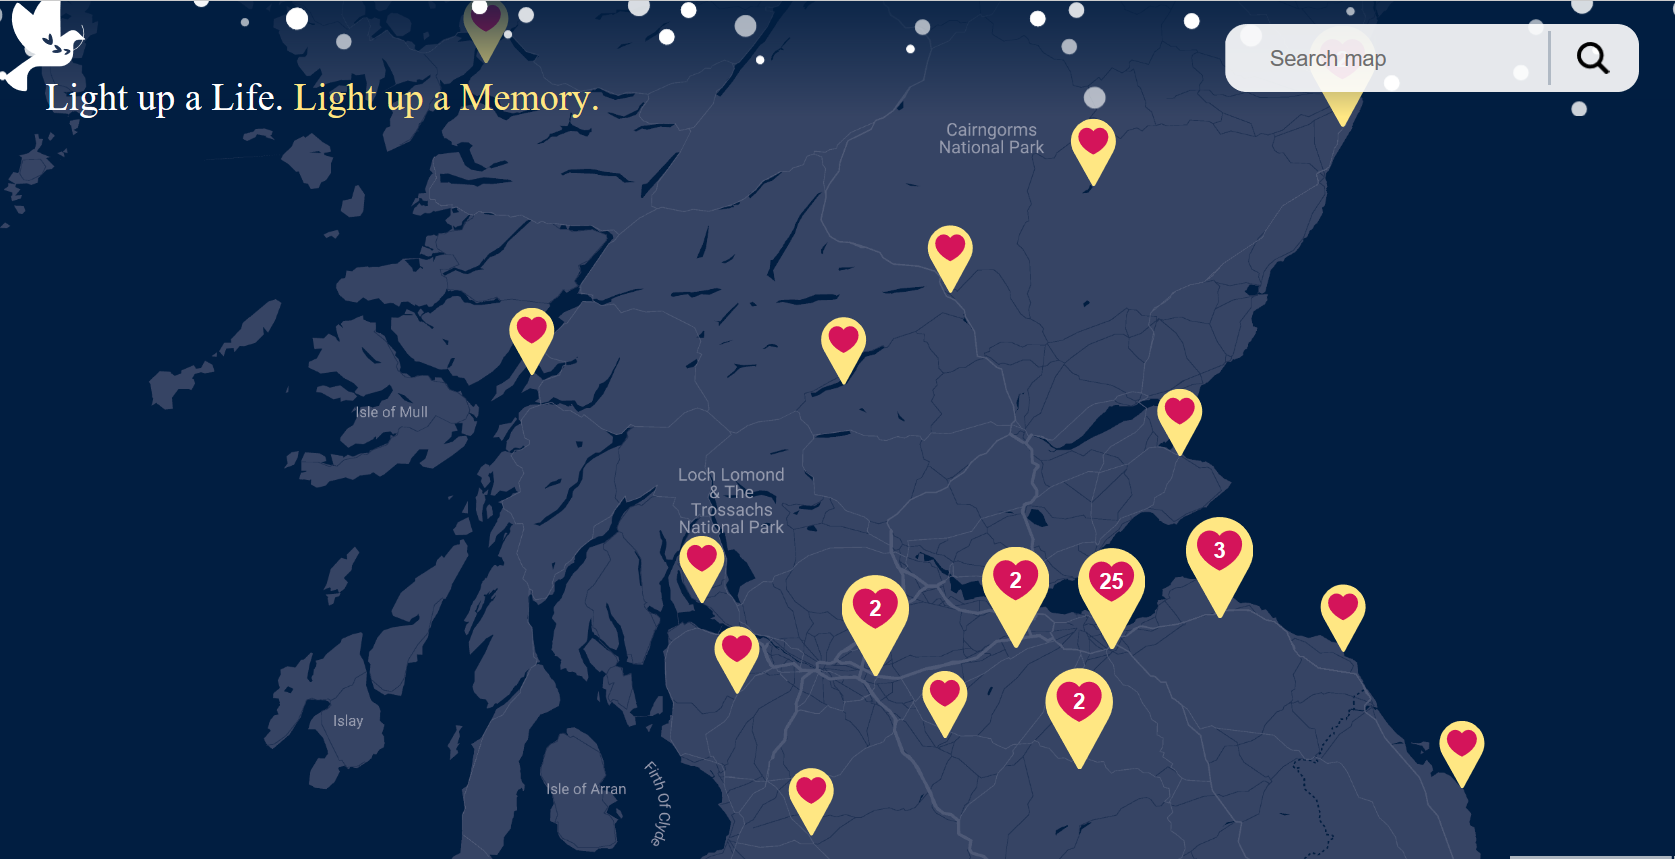 Memories left by loved ones of family and friends across Scotland. (lightupamemory.com)